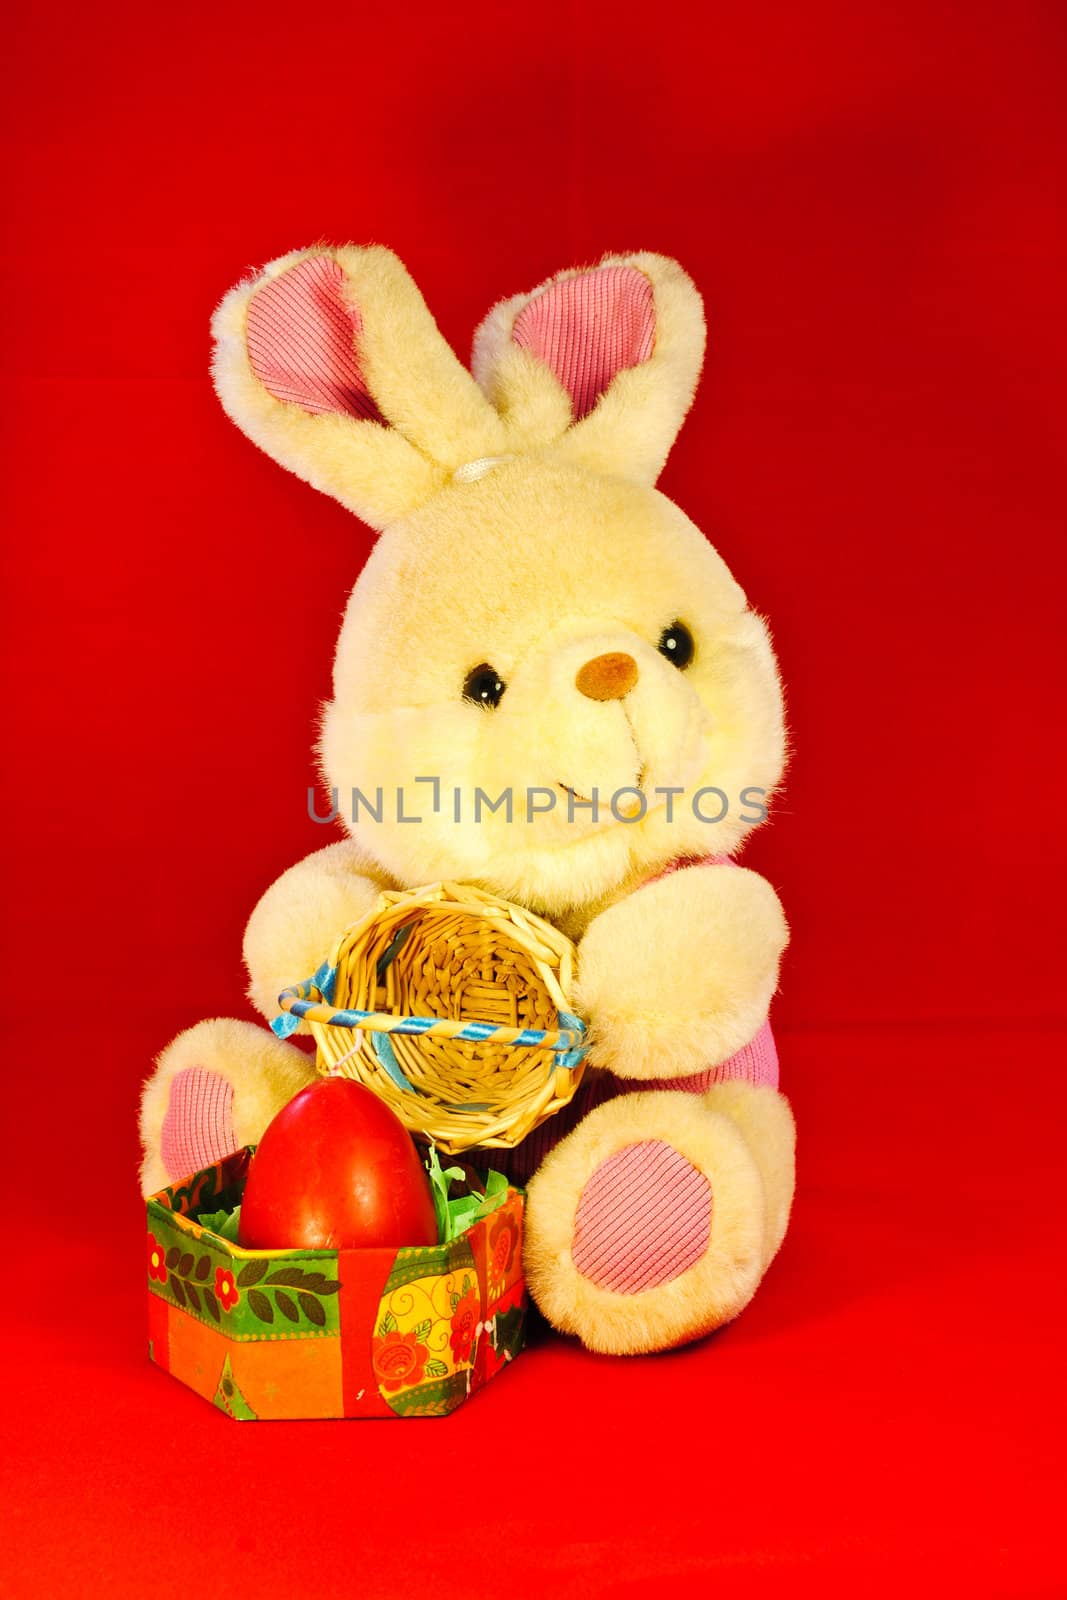 A toy bunny with a wicker basket and a red candle shaped like an egg